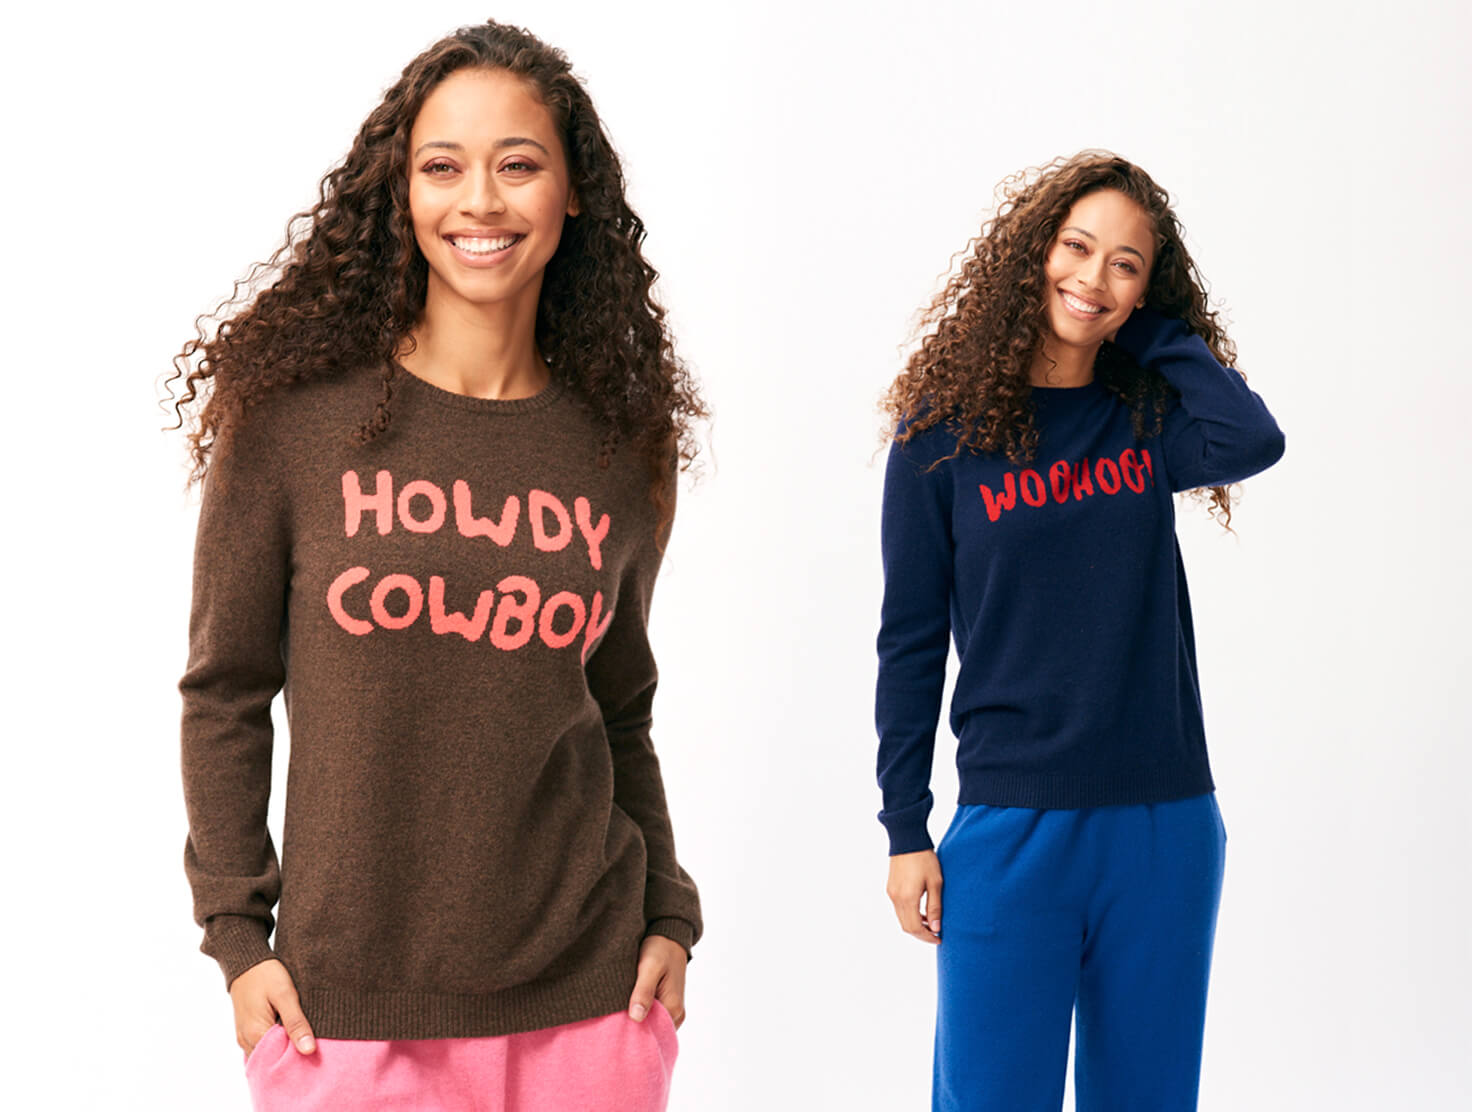 Two models wearing Jumper 1234 x The Jacksons cashmere collaboration jumpers "Howdy Cowboy" and "Woohoo"